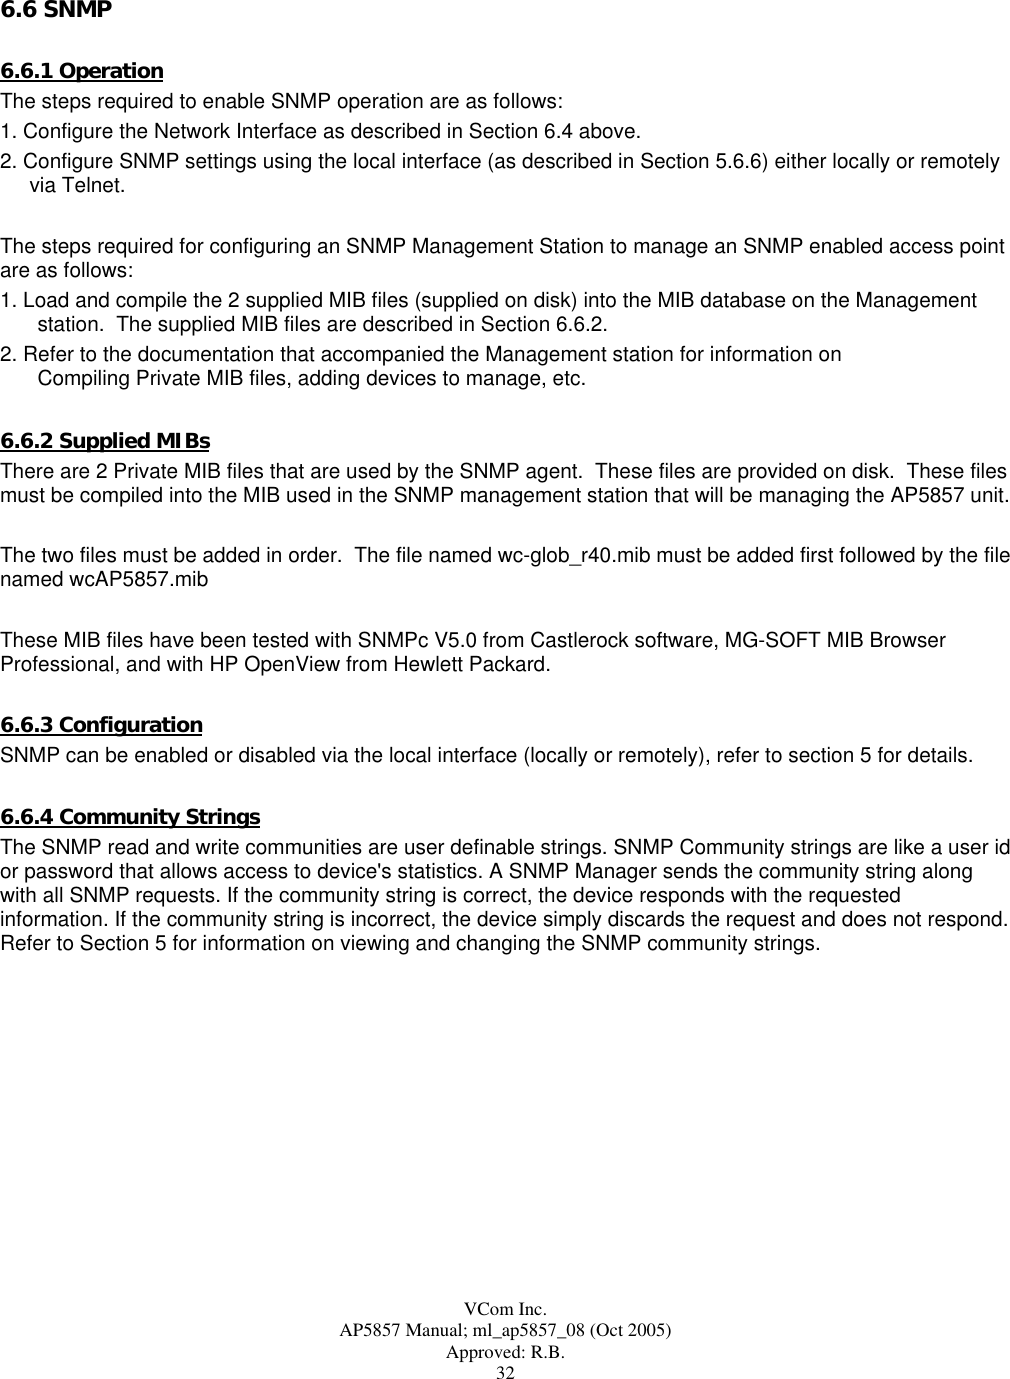  VCom Inc. AP5857 Manual; ml_ap5857_08 (Oct 2005) Approved: R.B. 32 6.6 SNMP  6.6.1 Operation The steps required to enable SNMP operation are as follows: 1. Configure the Network Interface as described in Section 6.4 above. 2. Configure SNMP settings using the local interface (as described in Section 5.6.6) either locally or remotely via Telnet.   The steps required for configuring an SNMP Management Station to manage an SNMP enabled access point are as follows: 1. Load and compile the 2 supplied MIB files (supplied on disk) into the MIB database on the Management station.  The supplied MIB files are described in Section 6.6.2.   2. Refer to the documentation that accompanied the Management station for information on  Compiling Private MIB files, adding devices to manage, etc.  6.6.2 Supplied MIBs There are 2 Private MIB files that are used by the SNMP agent.  These files are provided on disk.  These files must be compiled into the MIB used in the SNMP management station that will be managing the AP5857 unit.  The two files must be added in order.  The file named wc-glob_r40.mib must be added first followed by the file named wcAP5857.mib  These MIB files have been tested with SNMPc V5.0 from Castlerock software, MG-SOFT MIB Browser Professional, and with HP OpenView from Hewlett Packard.  6.6.3 Configuration SNMP can be enabled or disabled via the local interface (locally or remotely), refer to section 5 for details.  6.6.4 Community Strings The SNMP read and write communities are user definable strings. SNMP Community strings are like a user id or password that allows access to device&apos;s statistics. A SNMP Manager sends the community string along with all SNMP requests. If the community string is correct, the device responds with the requested information. If the community string is incorrect, the device simply discards the request and does not respond. Refer to Section 5 for information on viewing and changing the SNMP community strings.  